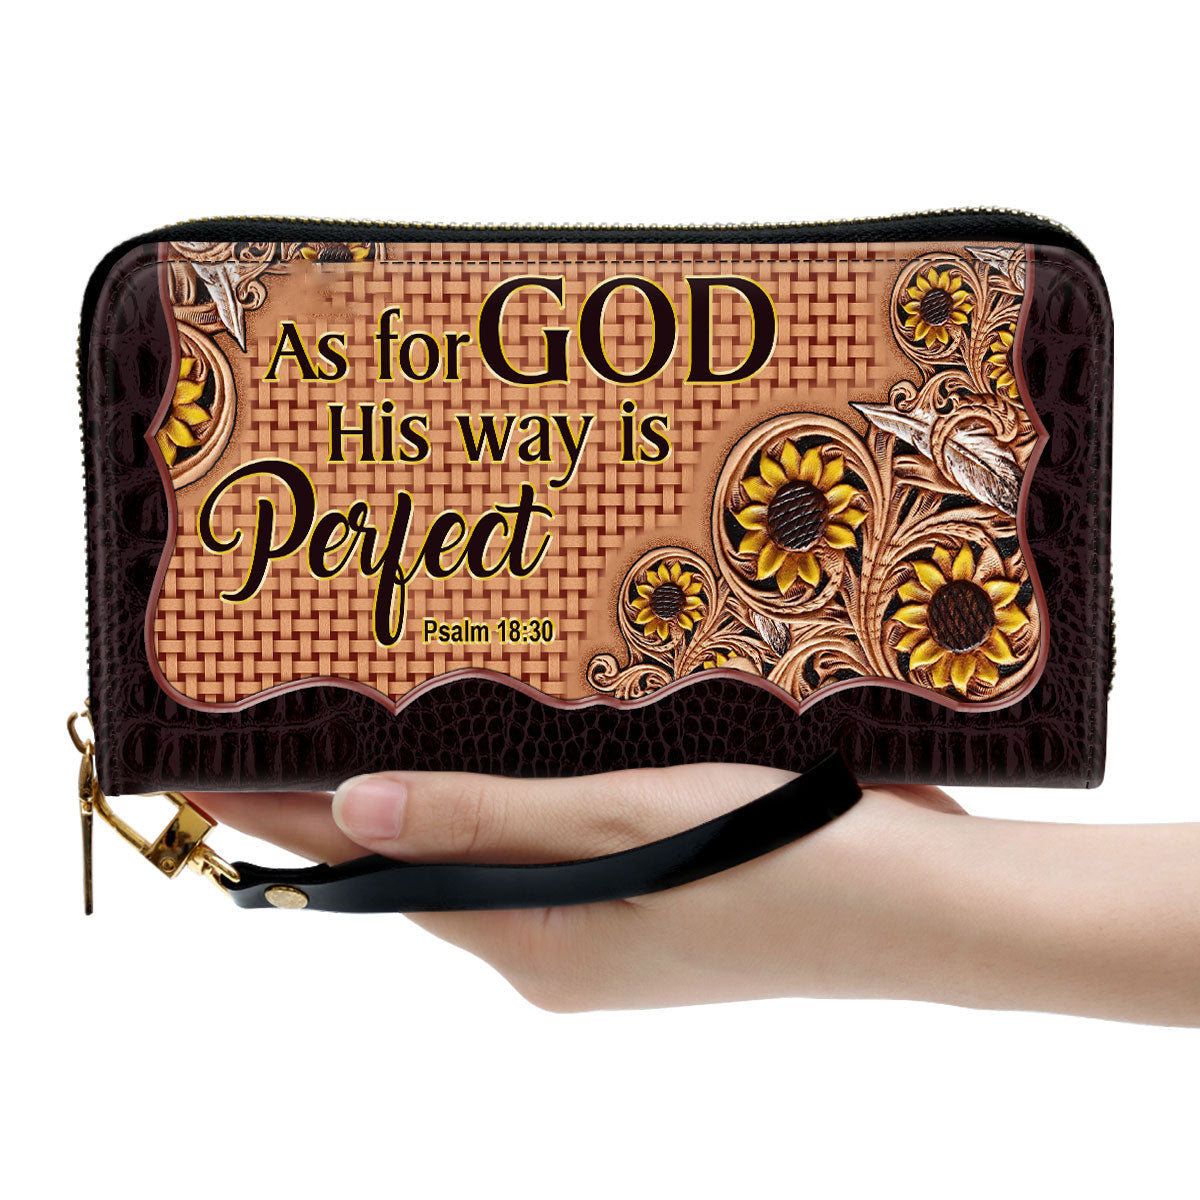 As For God, His Way Is Perfect - Lovely Sunflower Clutch Purse - Women Clutch Purse